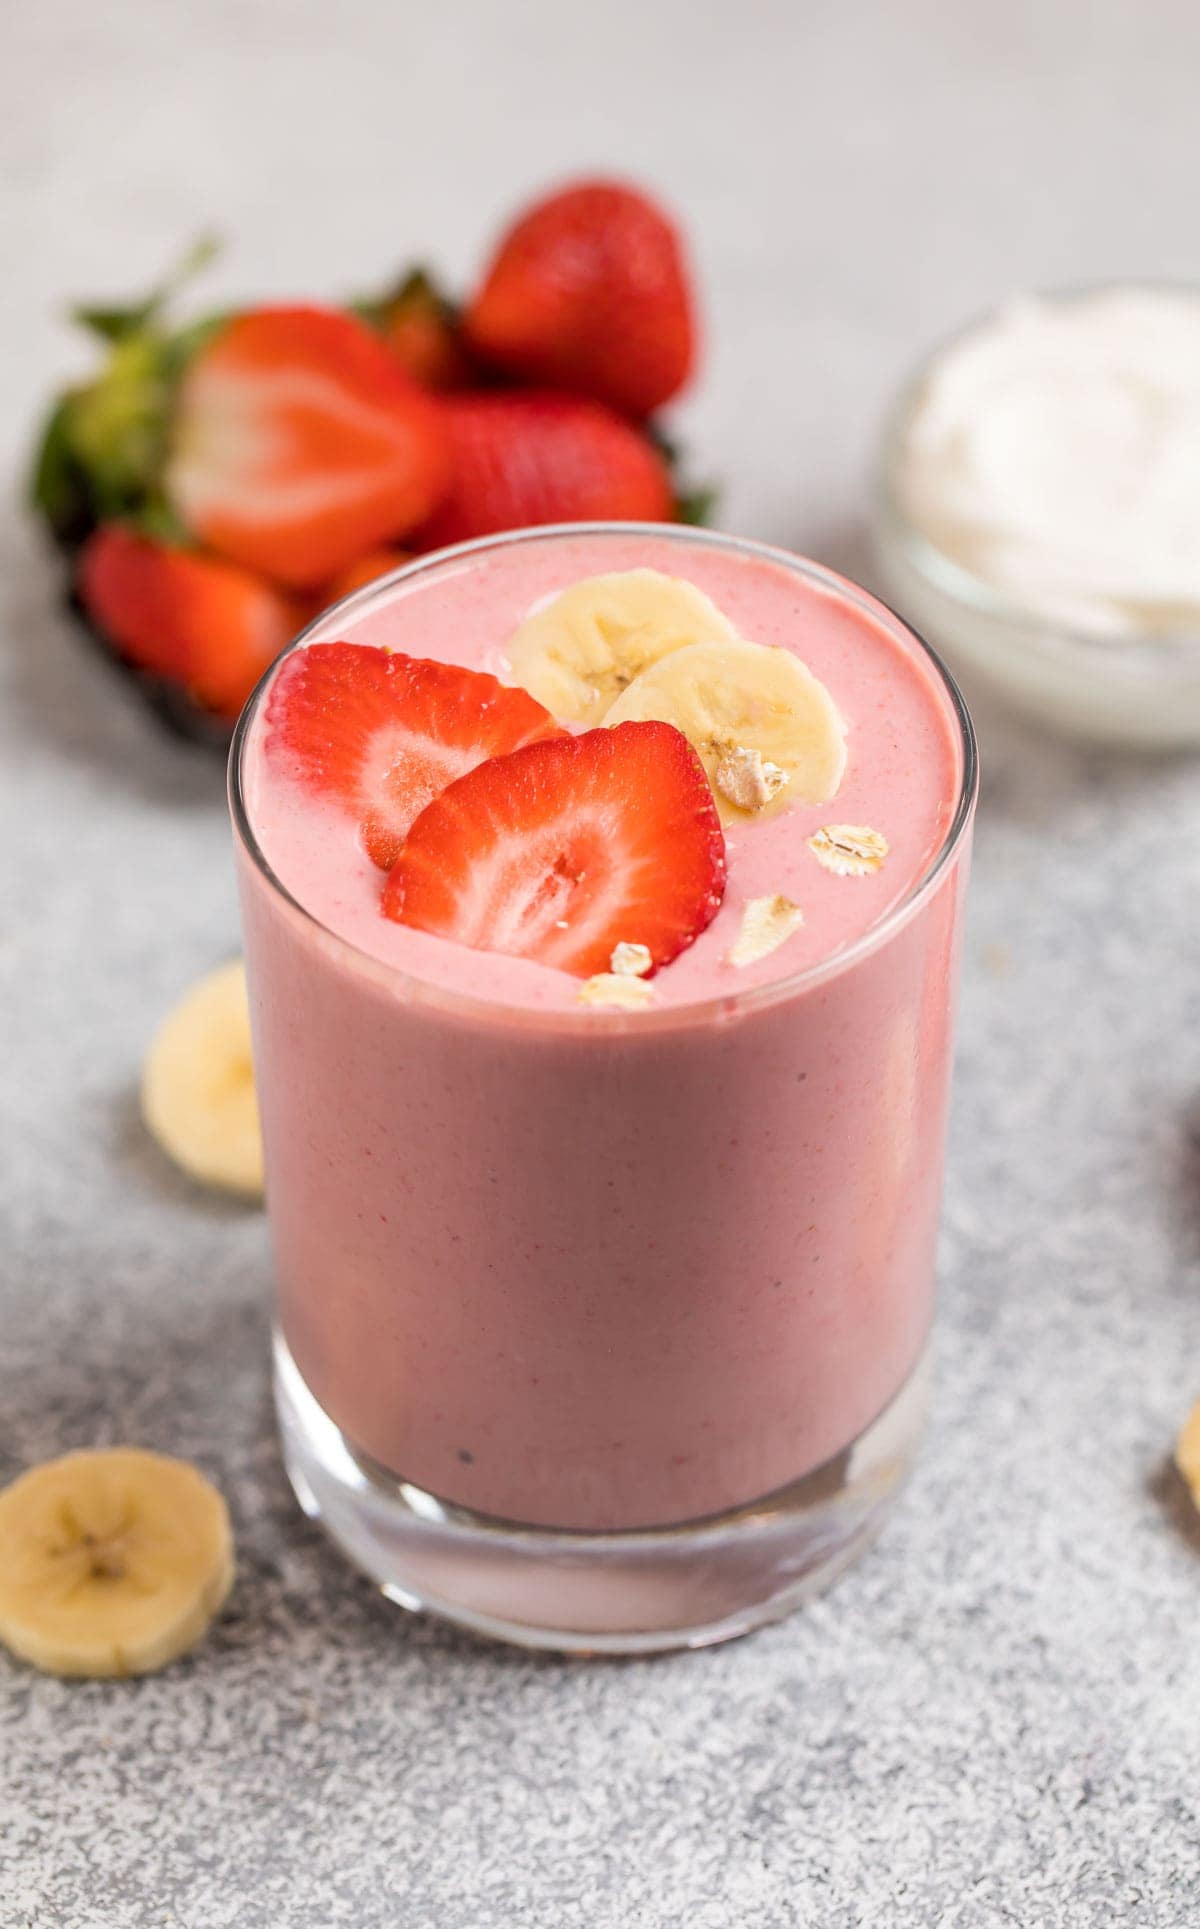 Thick Healthy Smoothie Recipes - Greek Yogurt Smoothie With Strawberries